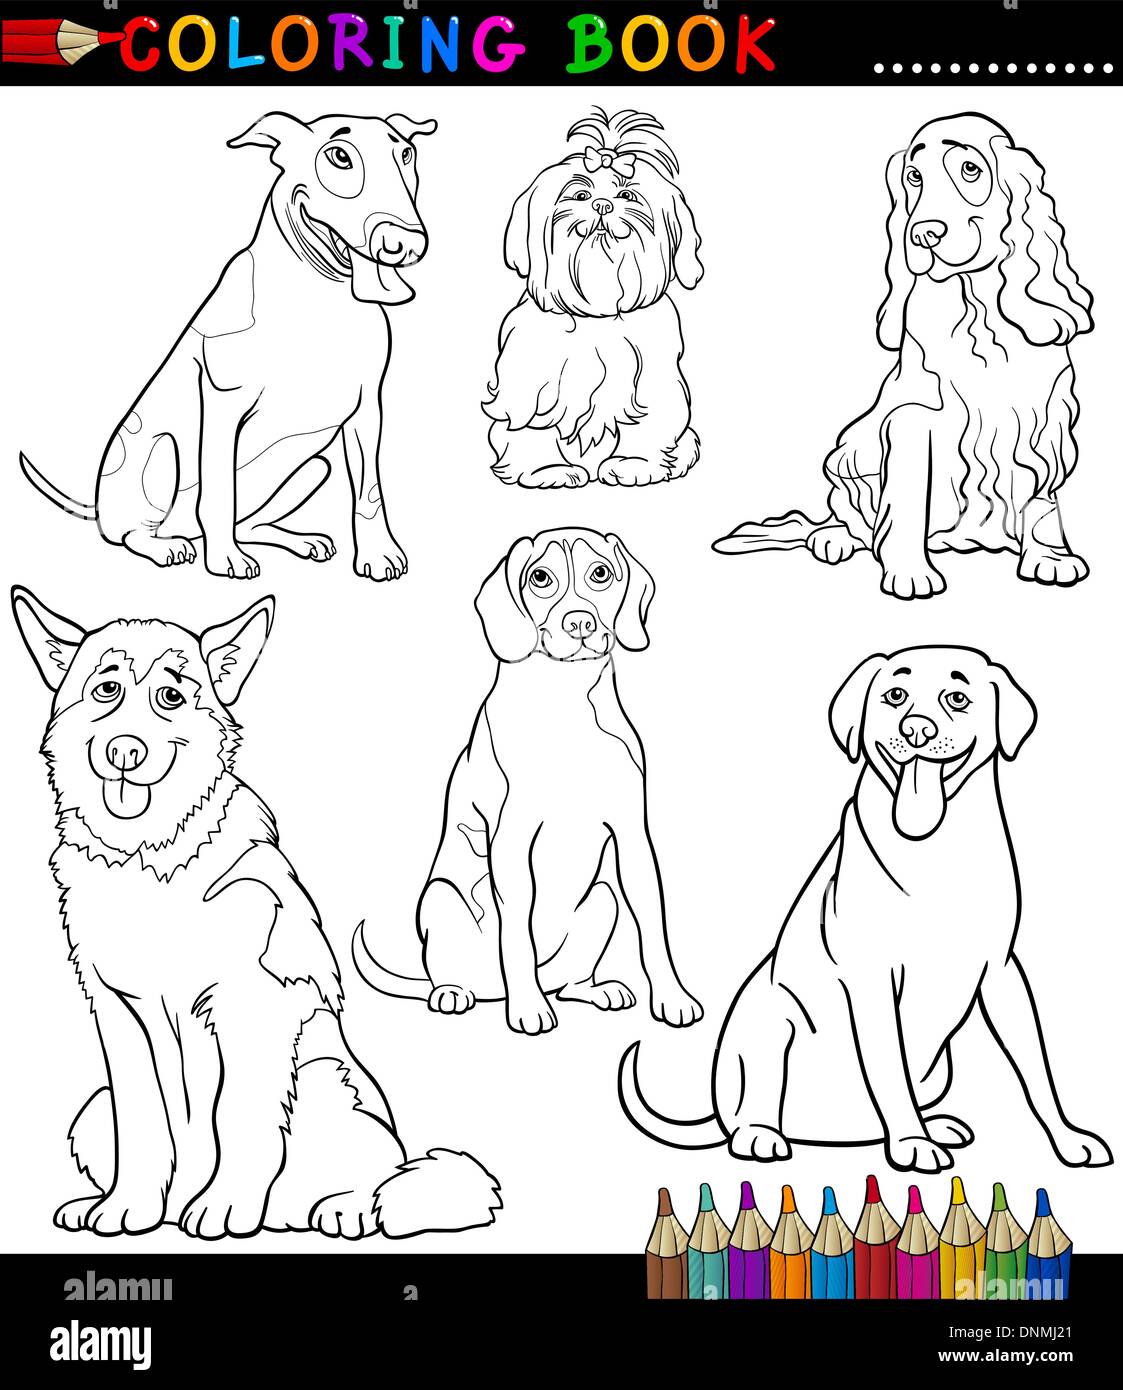 Coloring Book or Coloring Page Black and White Cartoon Illustration of Funny Purebred Dogs or Puppies Stock Vector